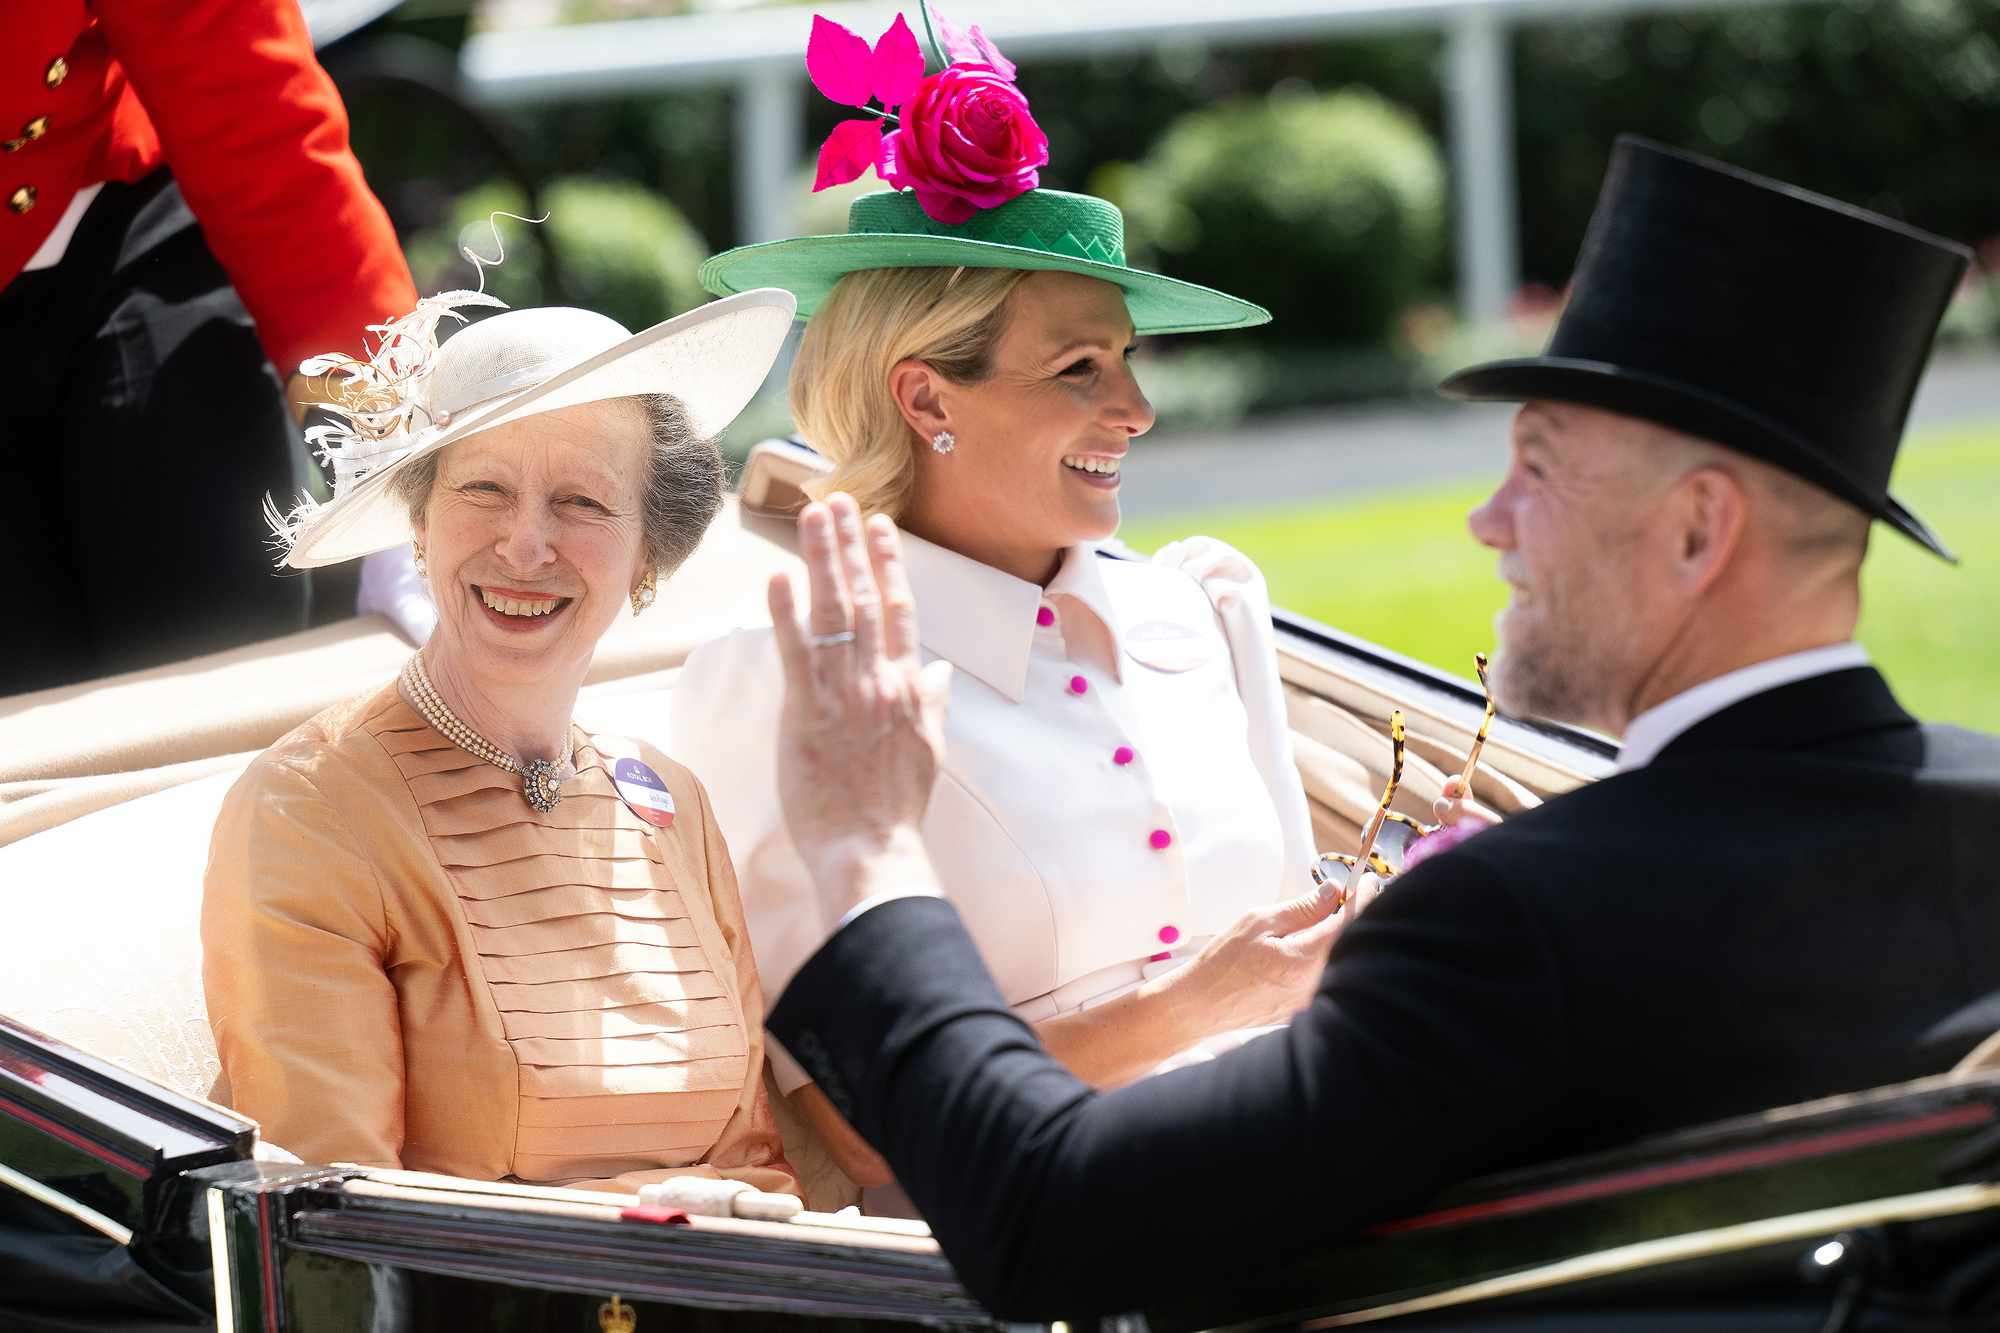 Princess Anne, Princess Royal, Zara Tindall and Mike Tindall attend Royal Ascot at Ascot Racecourse on June 16, 2022 in Ascot, England.